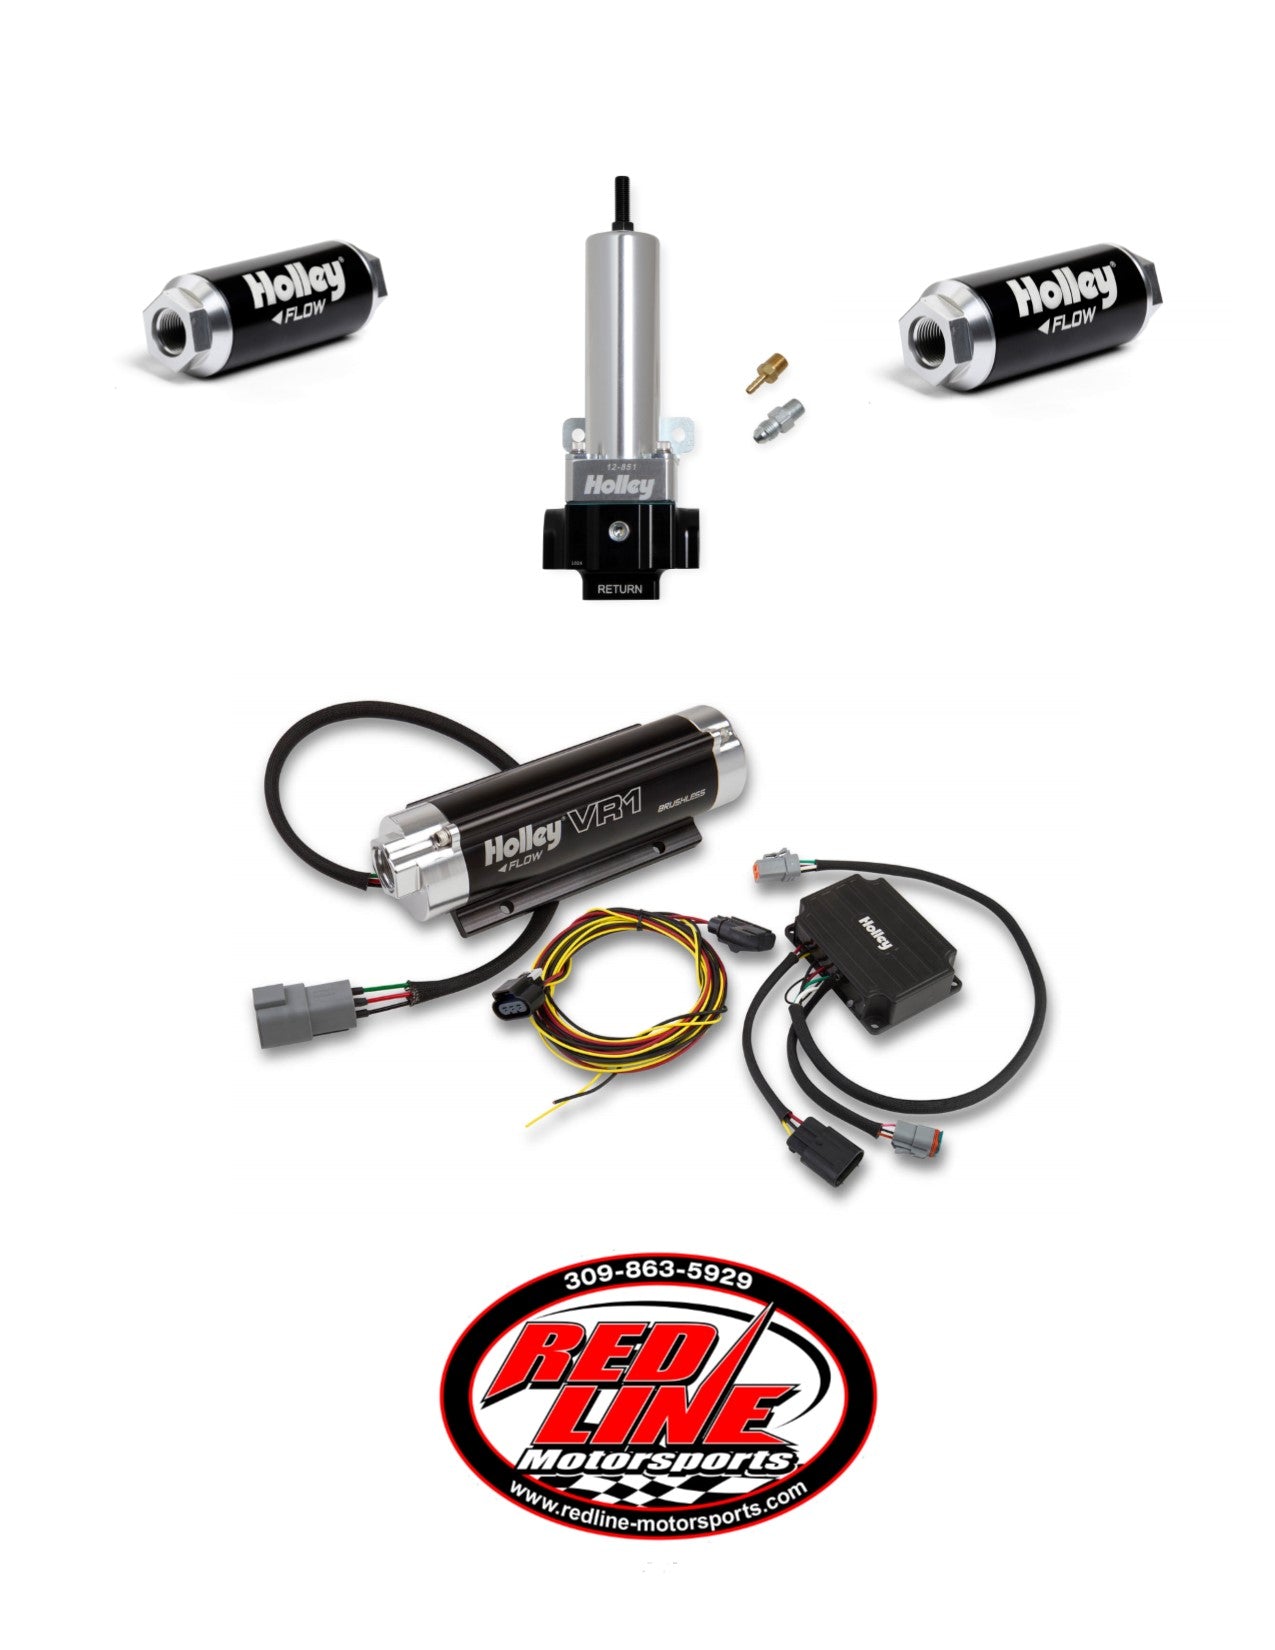 VR1 SERIES BRUSHLESS FUEL PUMP 2 PORT REGULATOR KIT (Up to 1600 HP N/A or 950 HP Boosted on Gasoline at 13.8V)